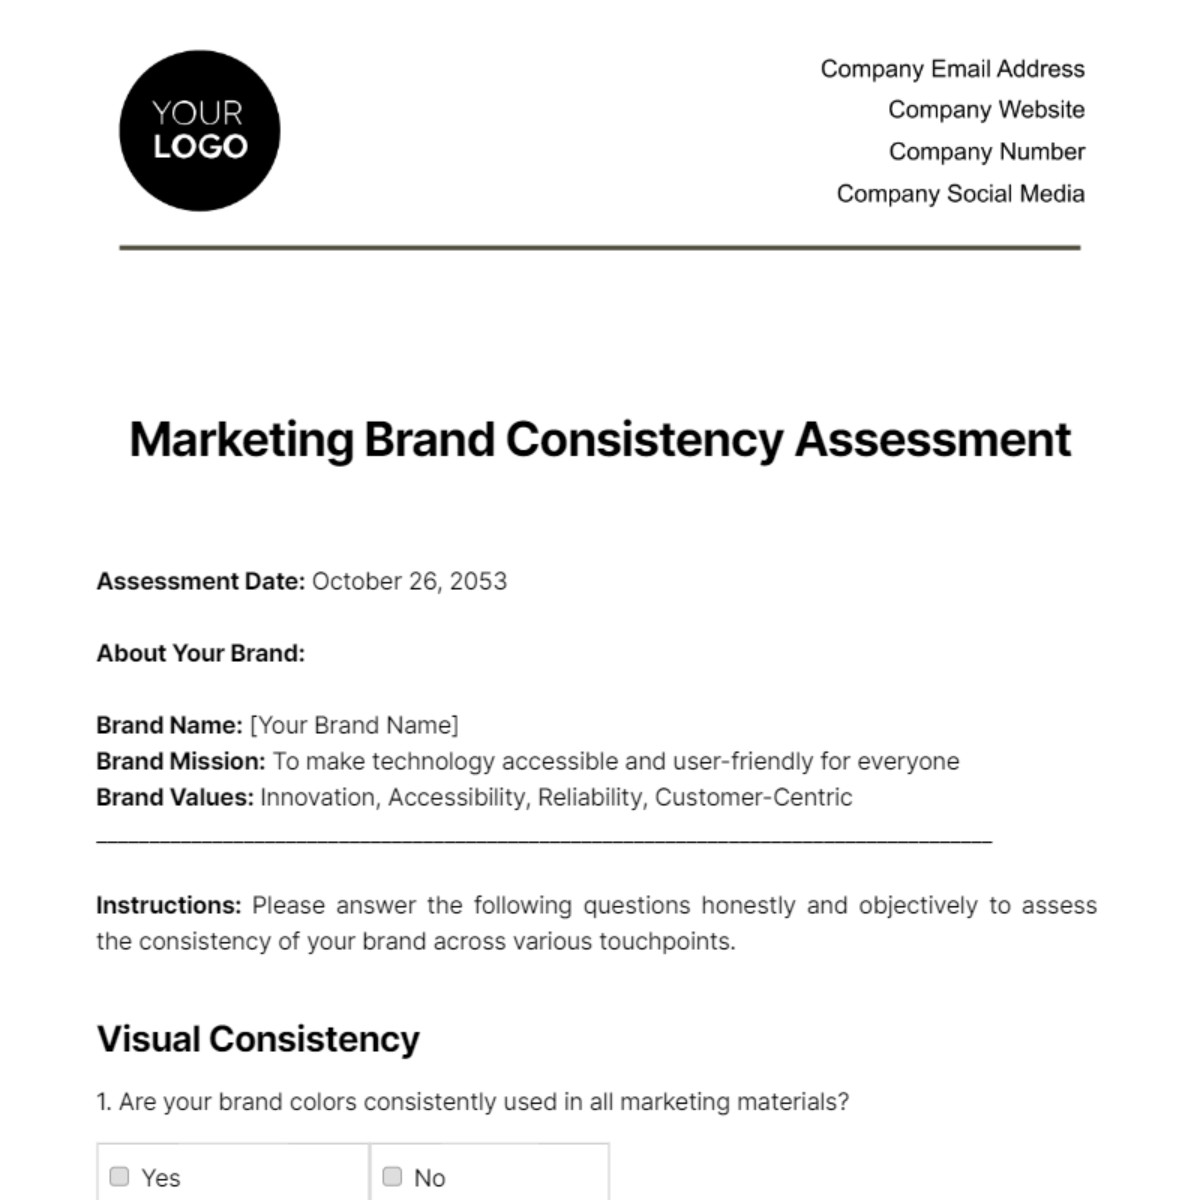 Marketing Brand Consistency Assessment Template